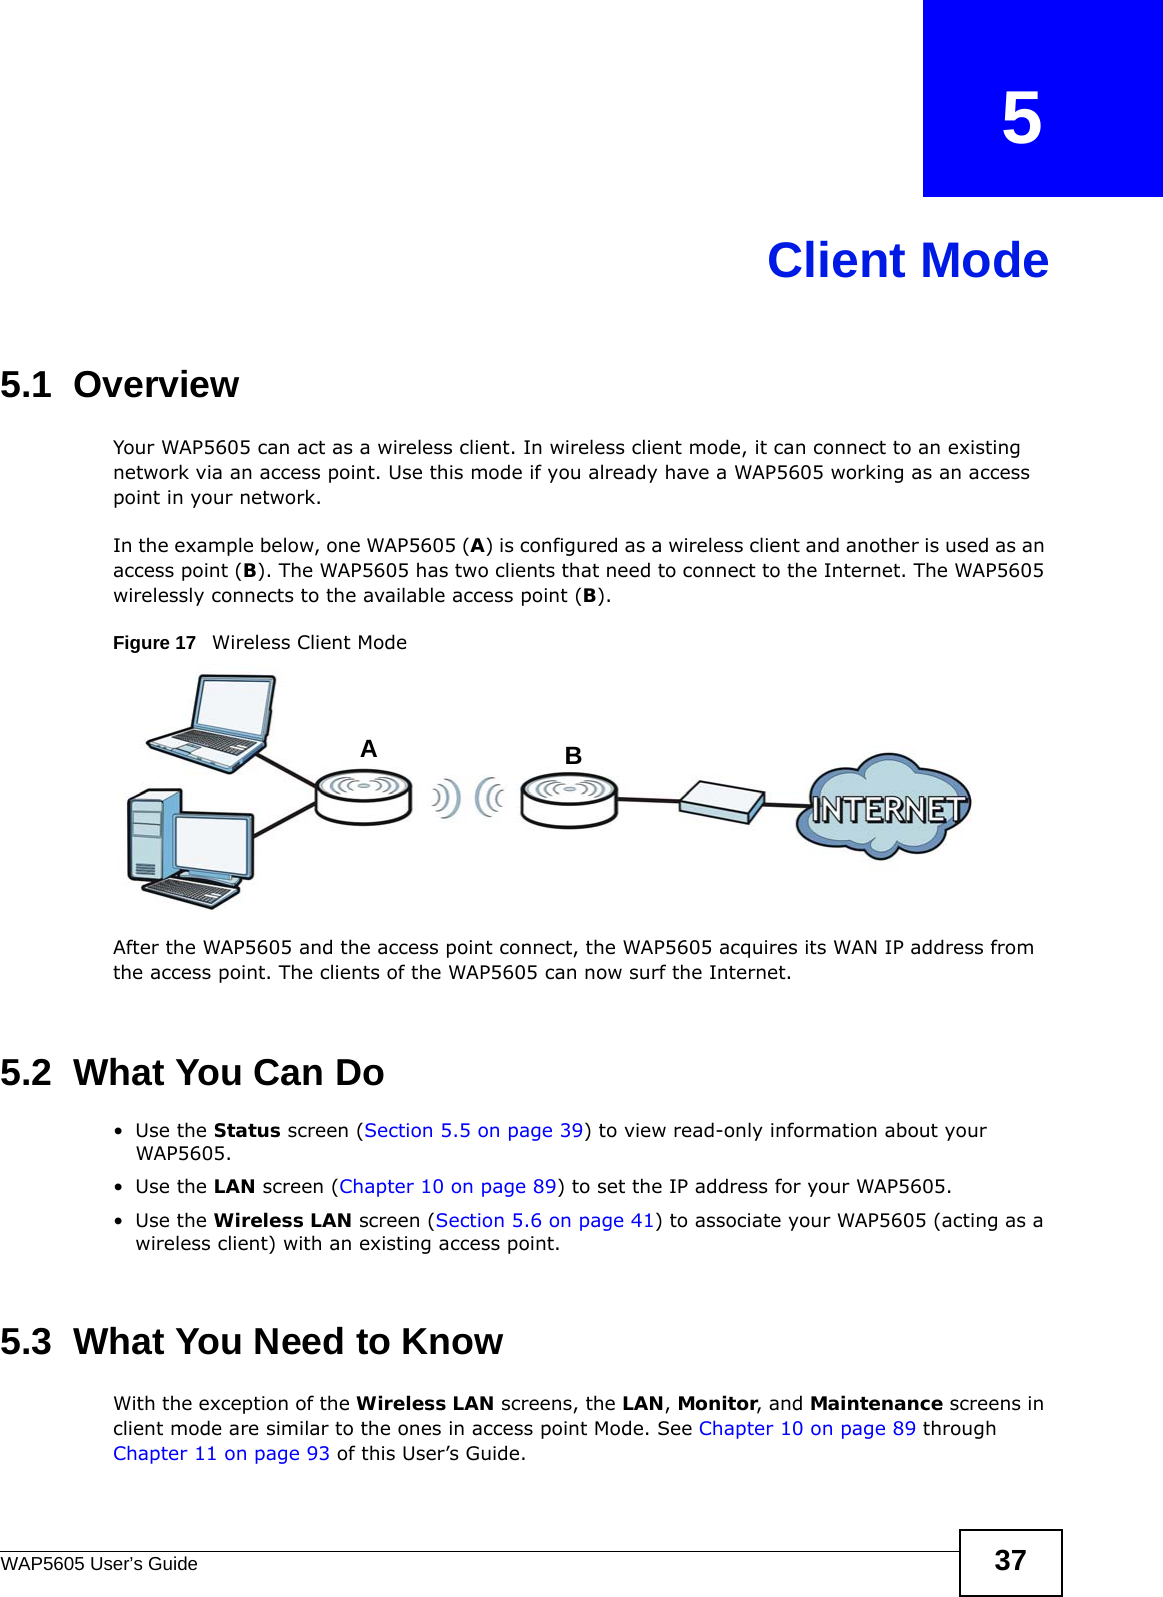 WAP5605 User’s Guide 37CHAPTER   5Client Mode5.1  OverviewYour WAP5605 can act as a wireless client. In wireless client mode, it can connect to an existing network via an access point. Use this mode if you already have a WAP5605 working as an access point in your network.In the example below, one WAP5605 (A) is configured as a wireless client and another is used as an access point (B). The WAP5605 has two clients that need to connect to the Internet. The WAP5605 wirelessly connects to the available access point (B). Figure 17   Wireless Client ModeAfter the WAP5605 and the access point connect, the WAP5605 acquires its WAN IP address from the access point. The clients of the WAP5605 can now surf the Internet. 5.2  What You Can Do•Use the Status screen (Section 5.5 on page 39) to view read-only information about your WAP5605.•Use the LAN screen (Chapter 10 on page 89) to set the IP address for your WAP5605.•Use the Wireless LAN screen (Section 5.6 on page 41) to associate your WAP5605 (acting as a wireless client) with an existing access point.5.3  What You Need to KnowWith the exception of the Wireless LAN screens, the LAN, Monitor, and Maintenance screens in client mode are similar to the ones in access point Mode. See Chapter 10 on page 89 through Chapter 11 on page 93 of this User’s Guide.AB